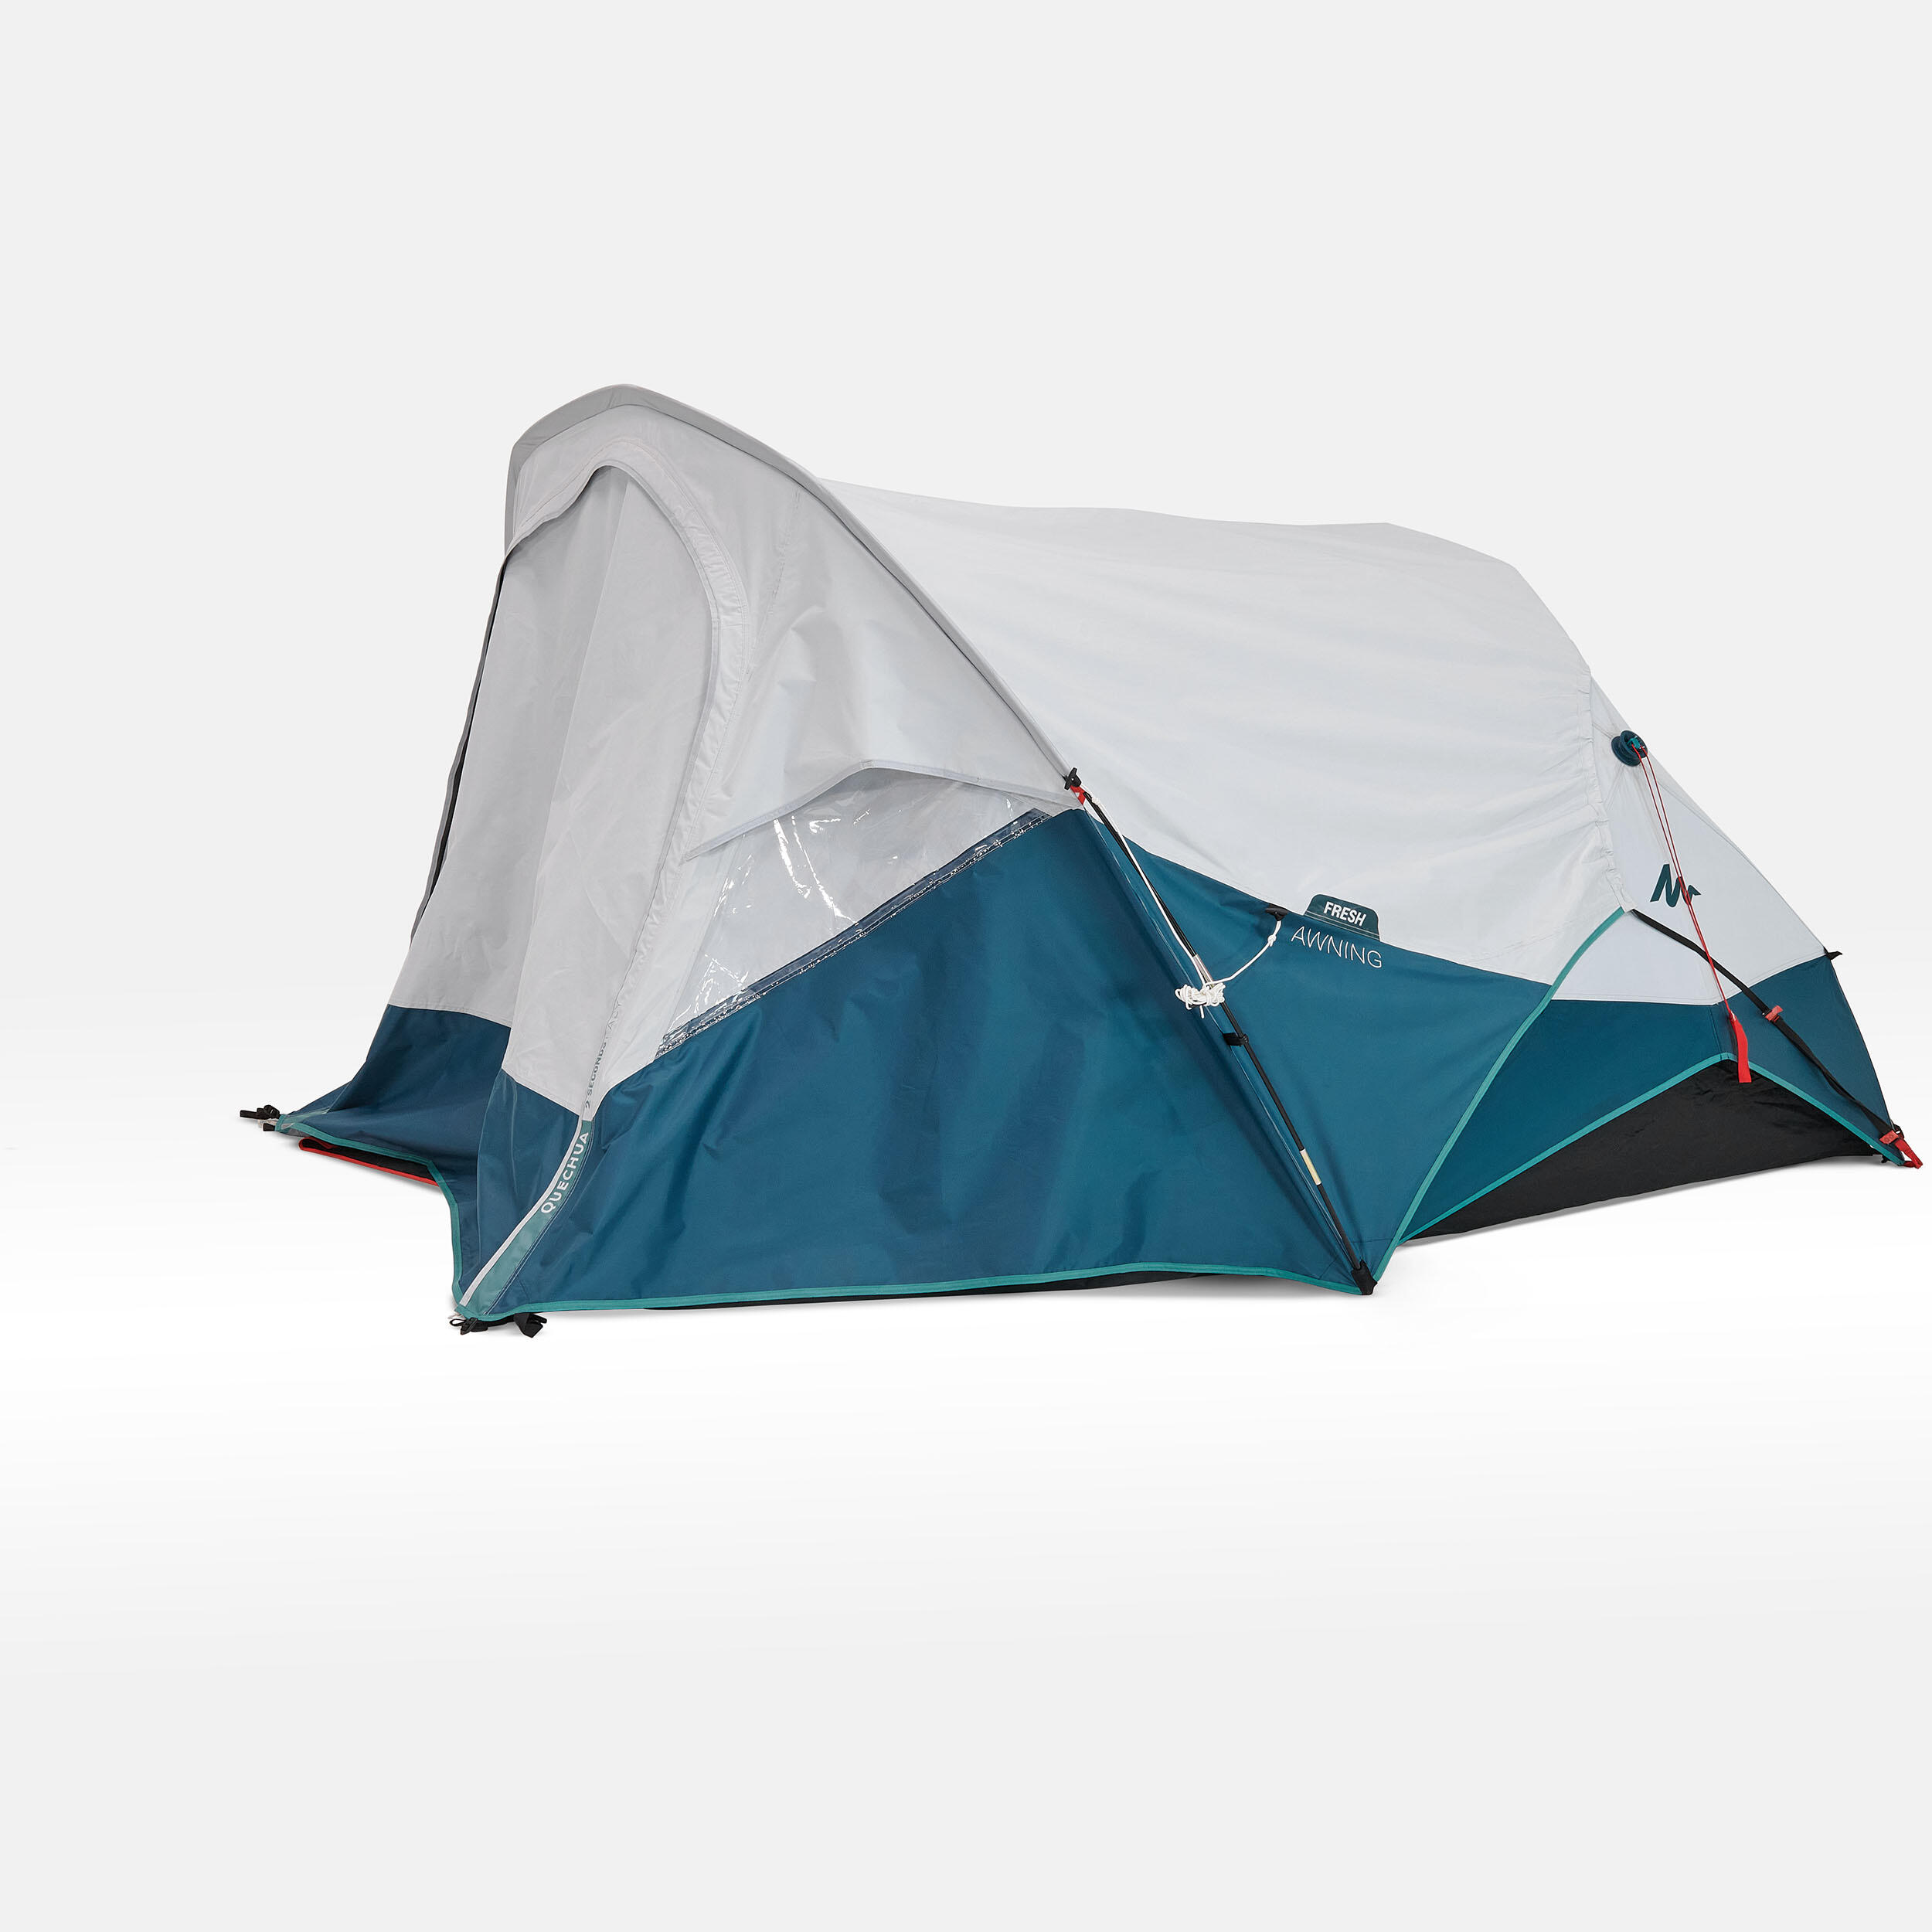 Camping awning - 2 Seconds EASY - Fresh 19/20